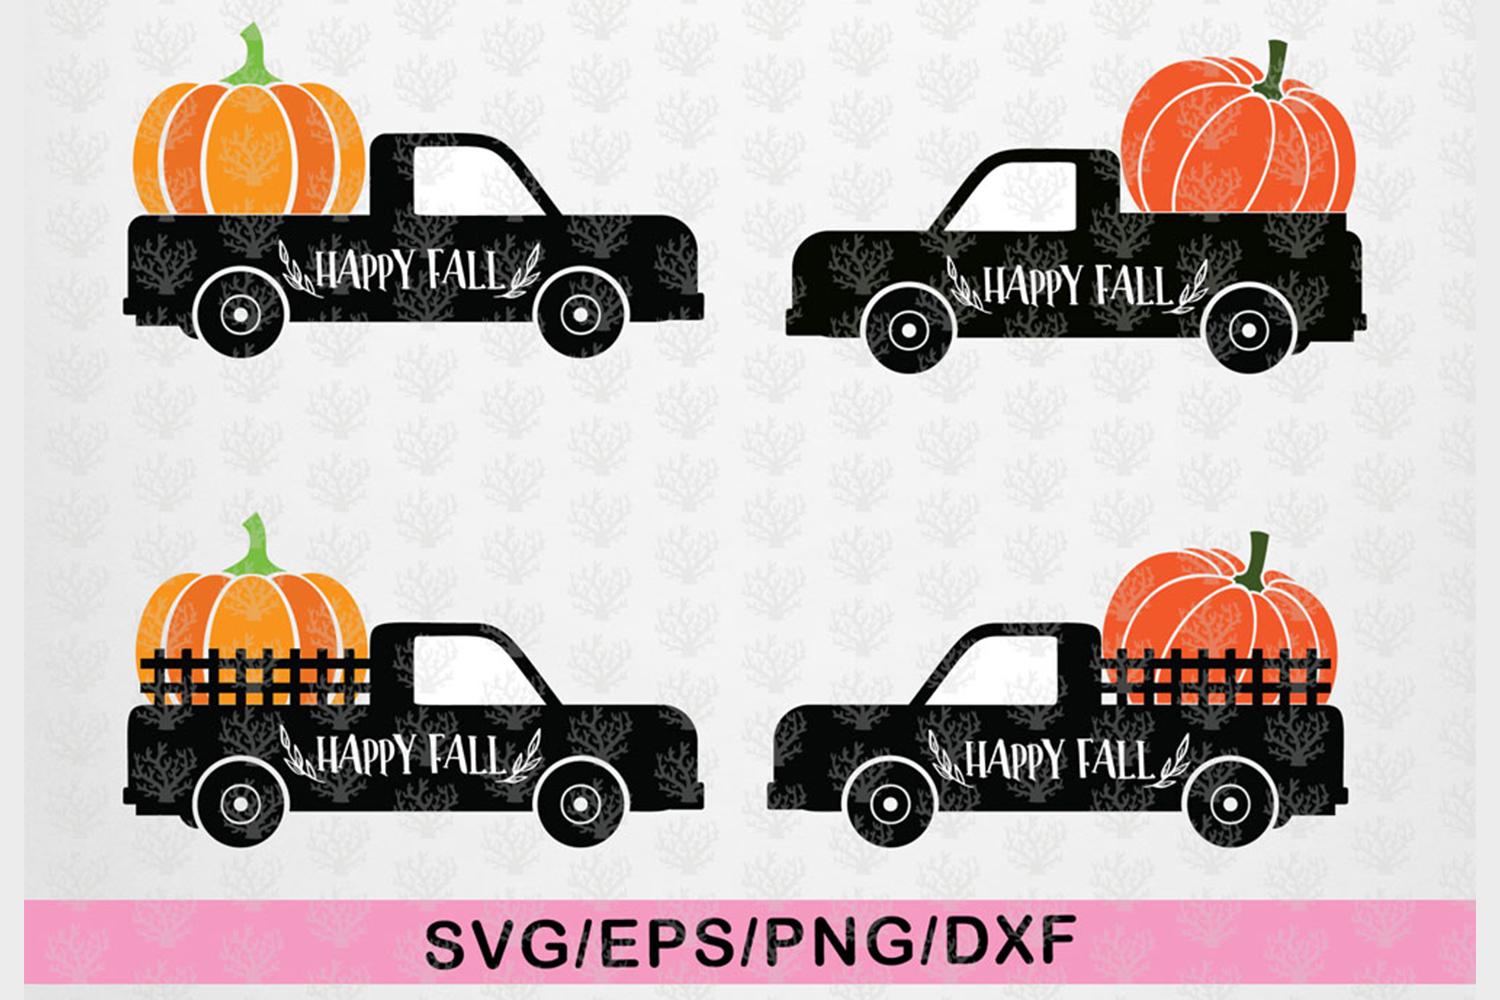 Download Happy Fall Pumpkin Truck - Thanksgiving SVG EPS DXF PNG ...